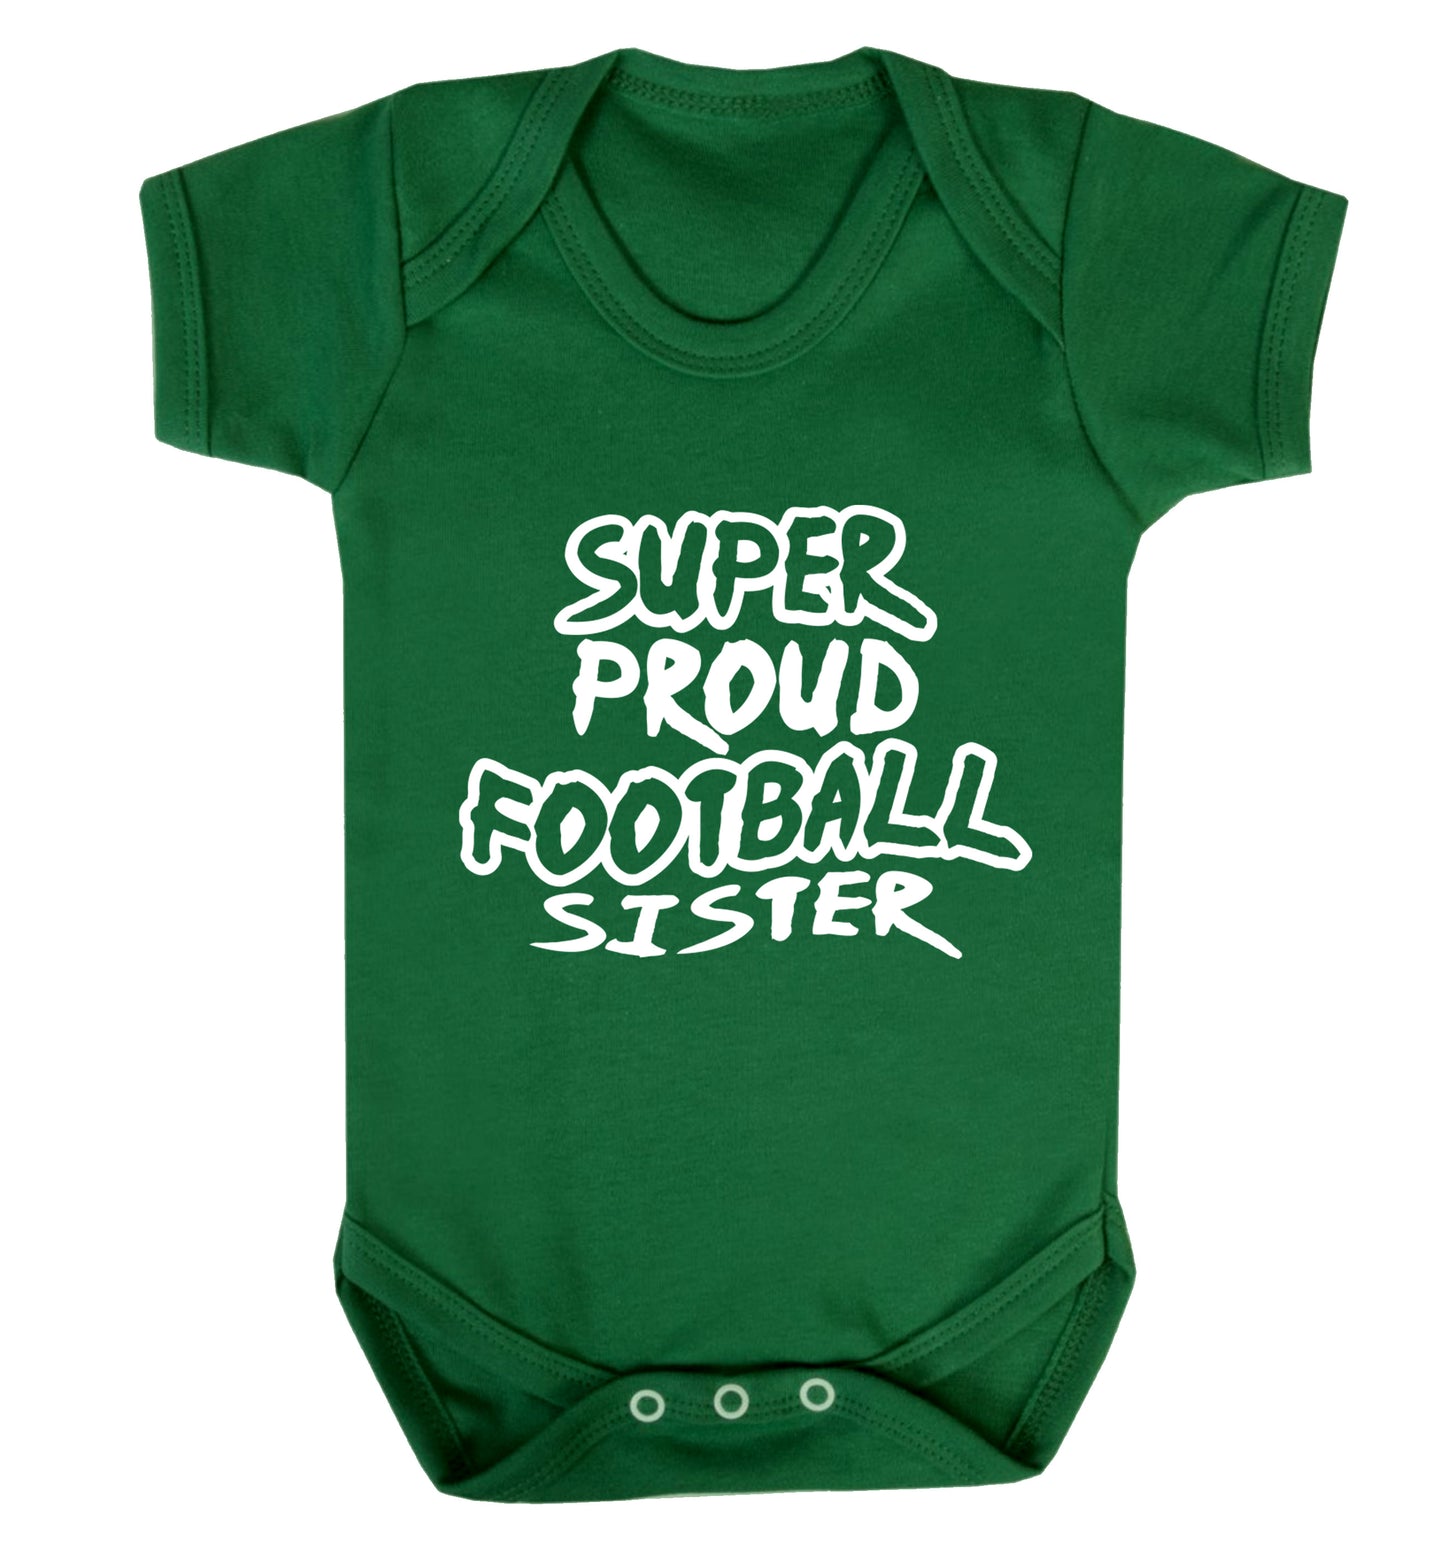 Super proud football sister Baby Vest green 18-24 months